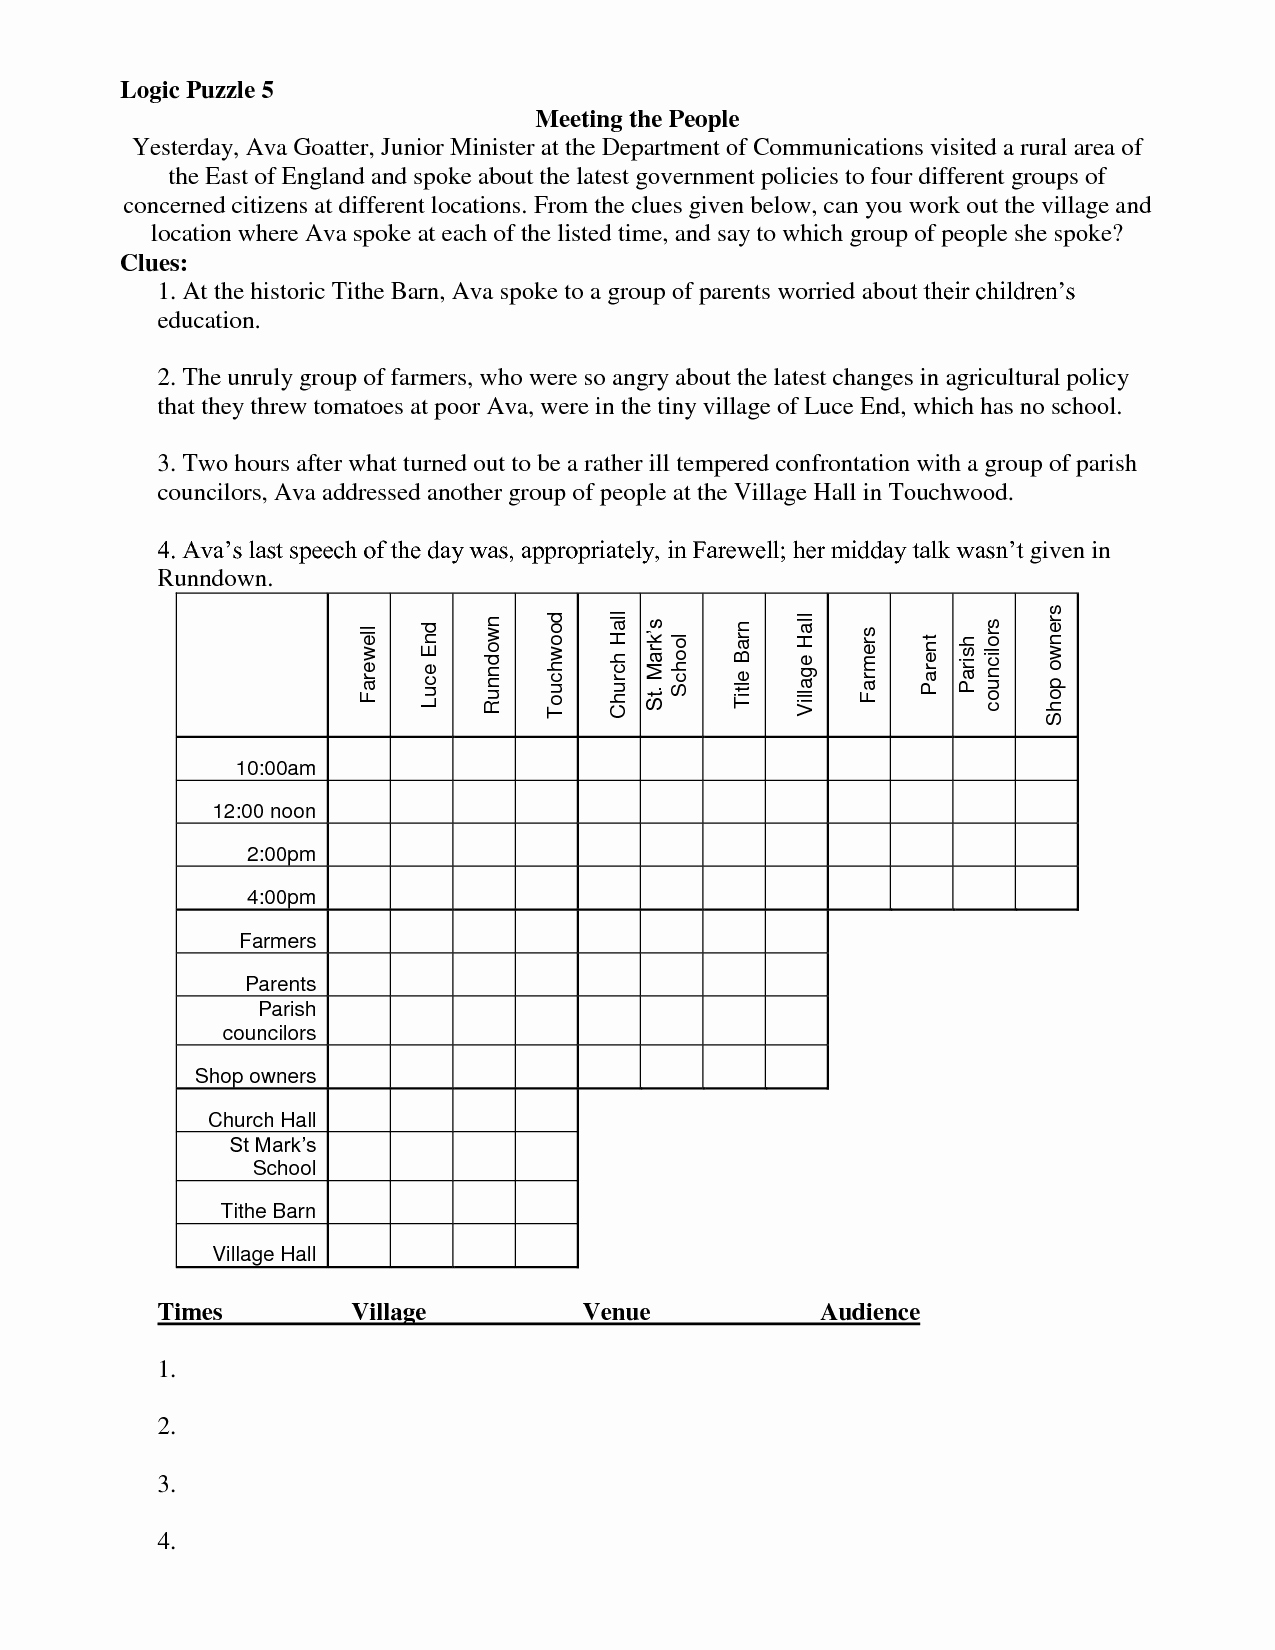 printable-logic-puzzles-for-6th-graders-printable-crossword-puzzles